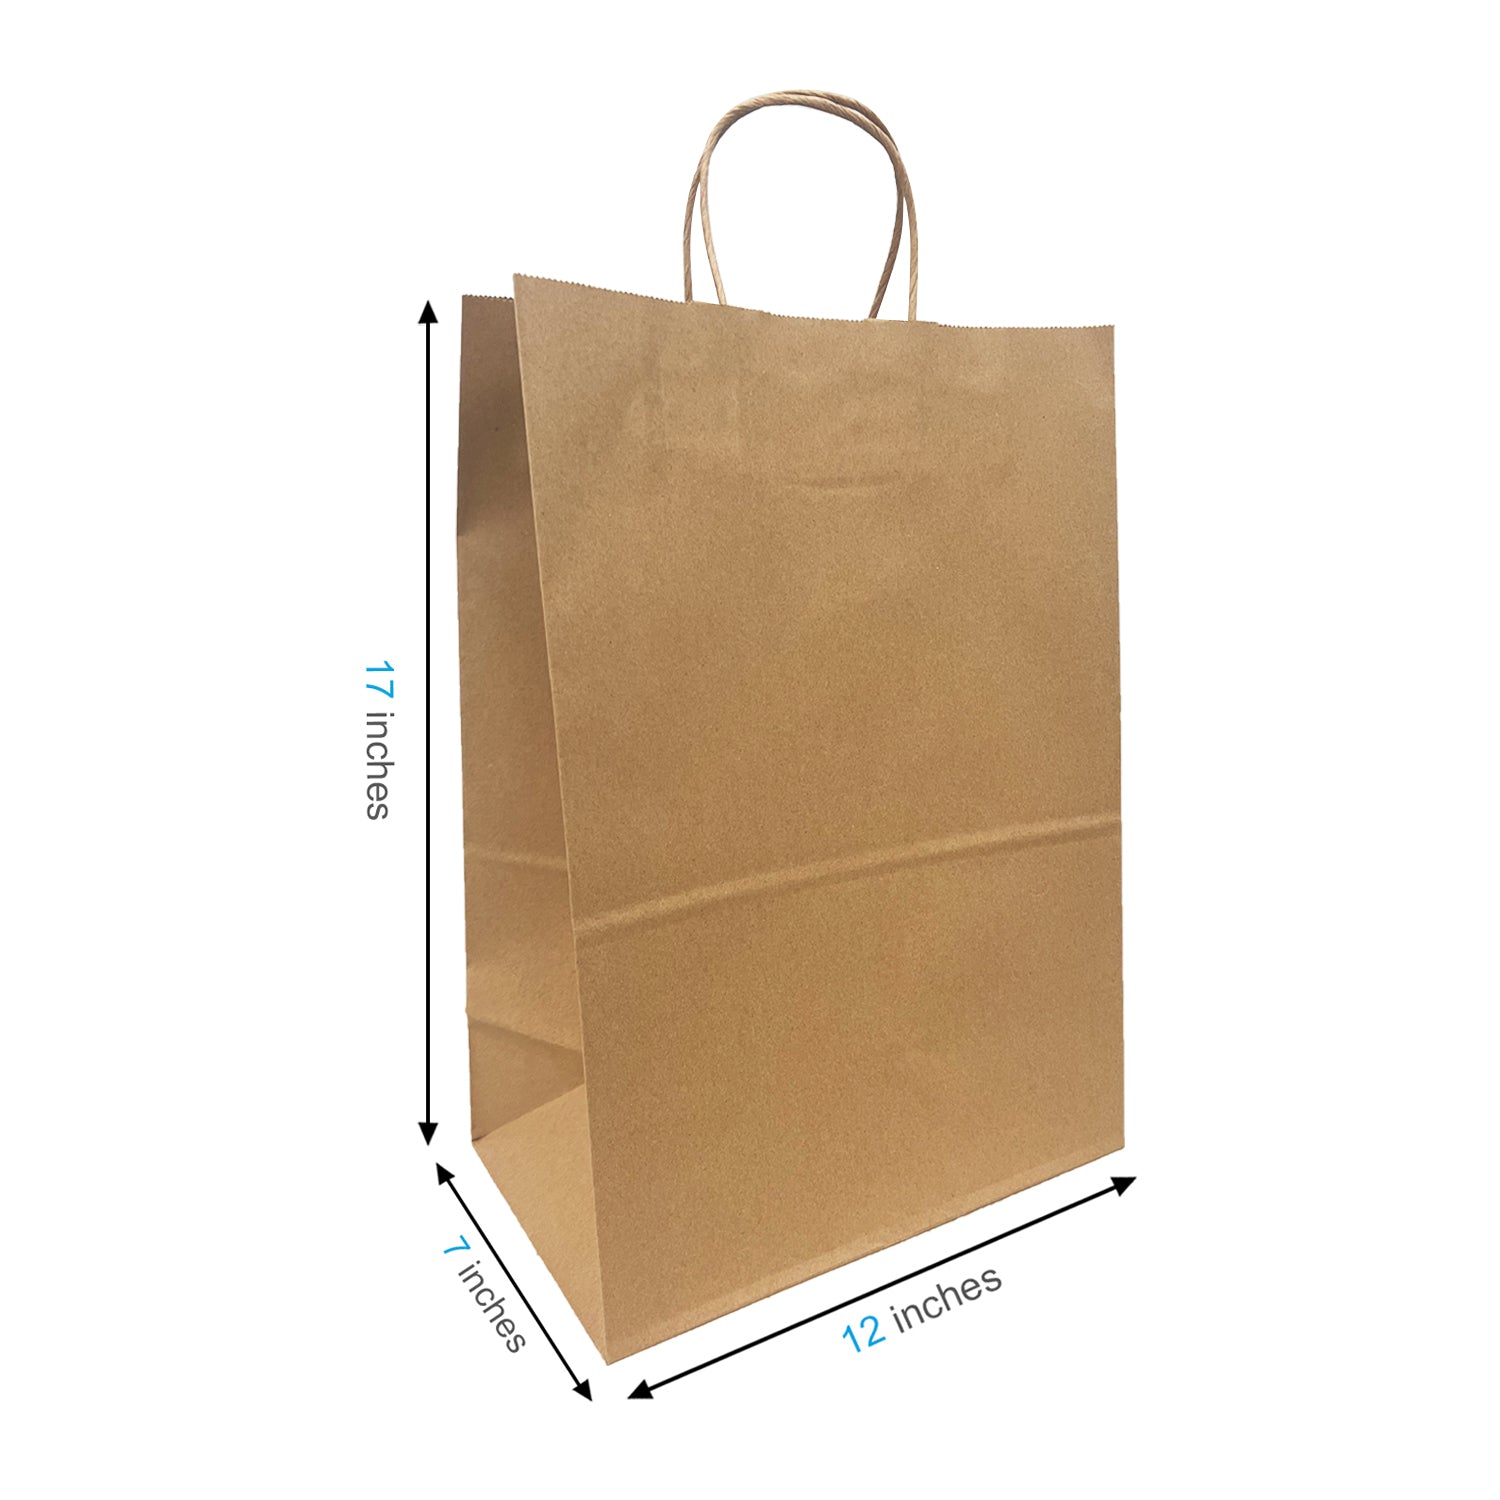 250 Pcs, Simba, 12x7x14 inches, Kraft Paper Bags, with Twisted Handle